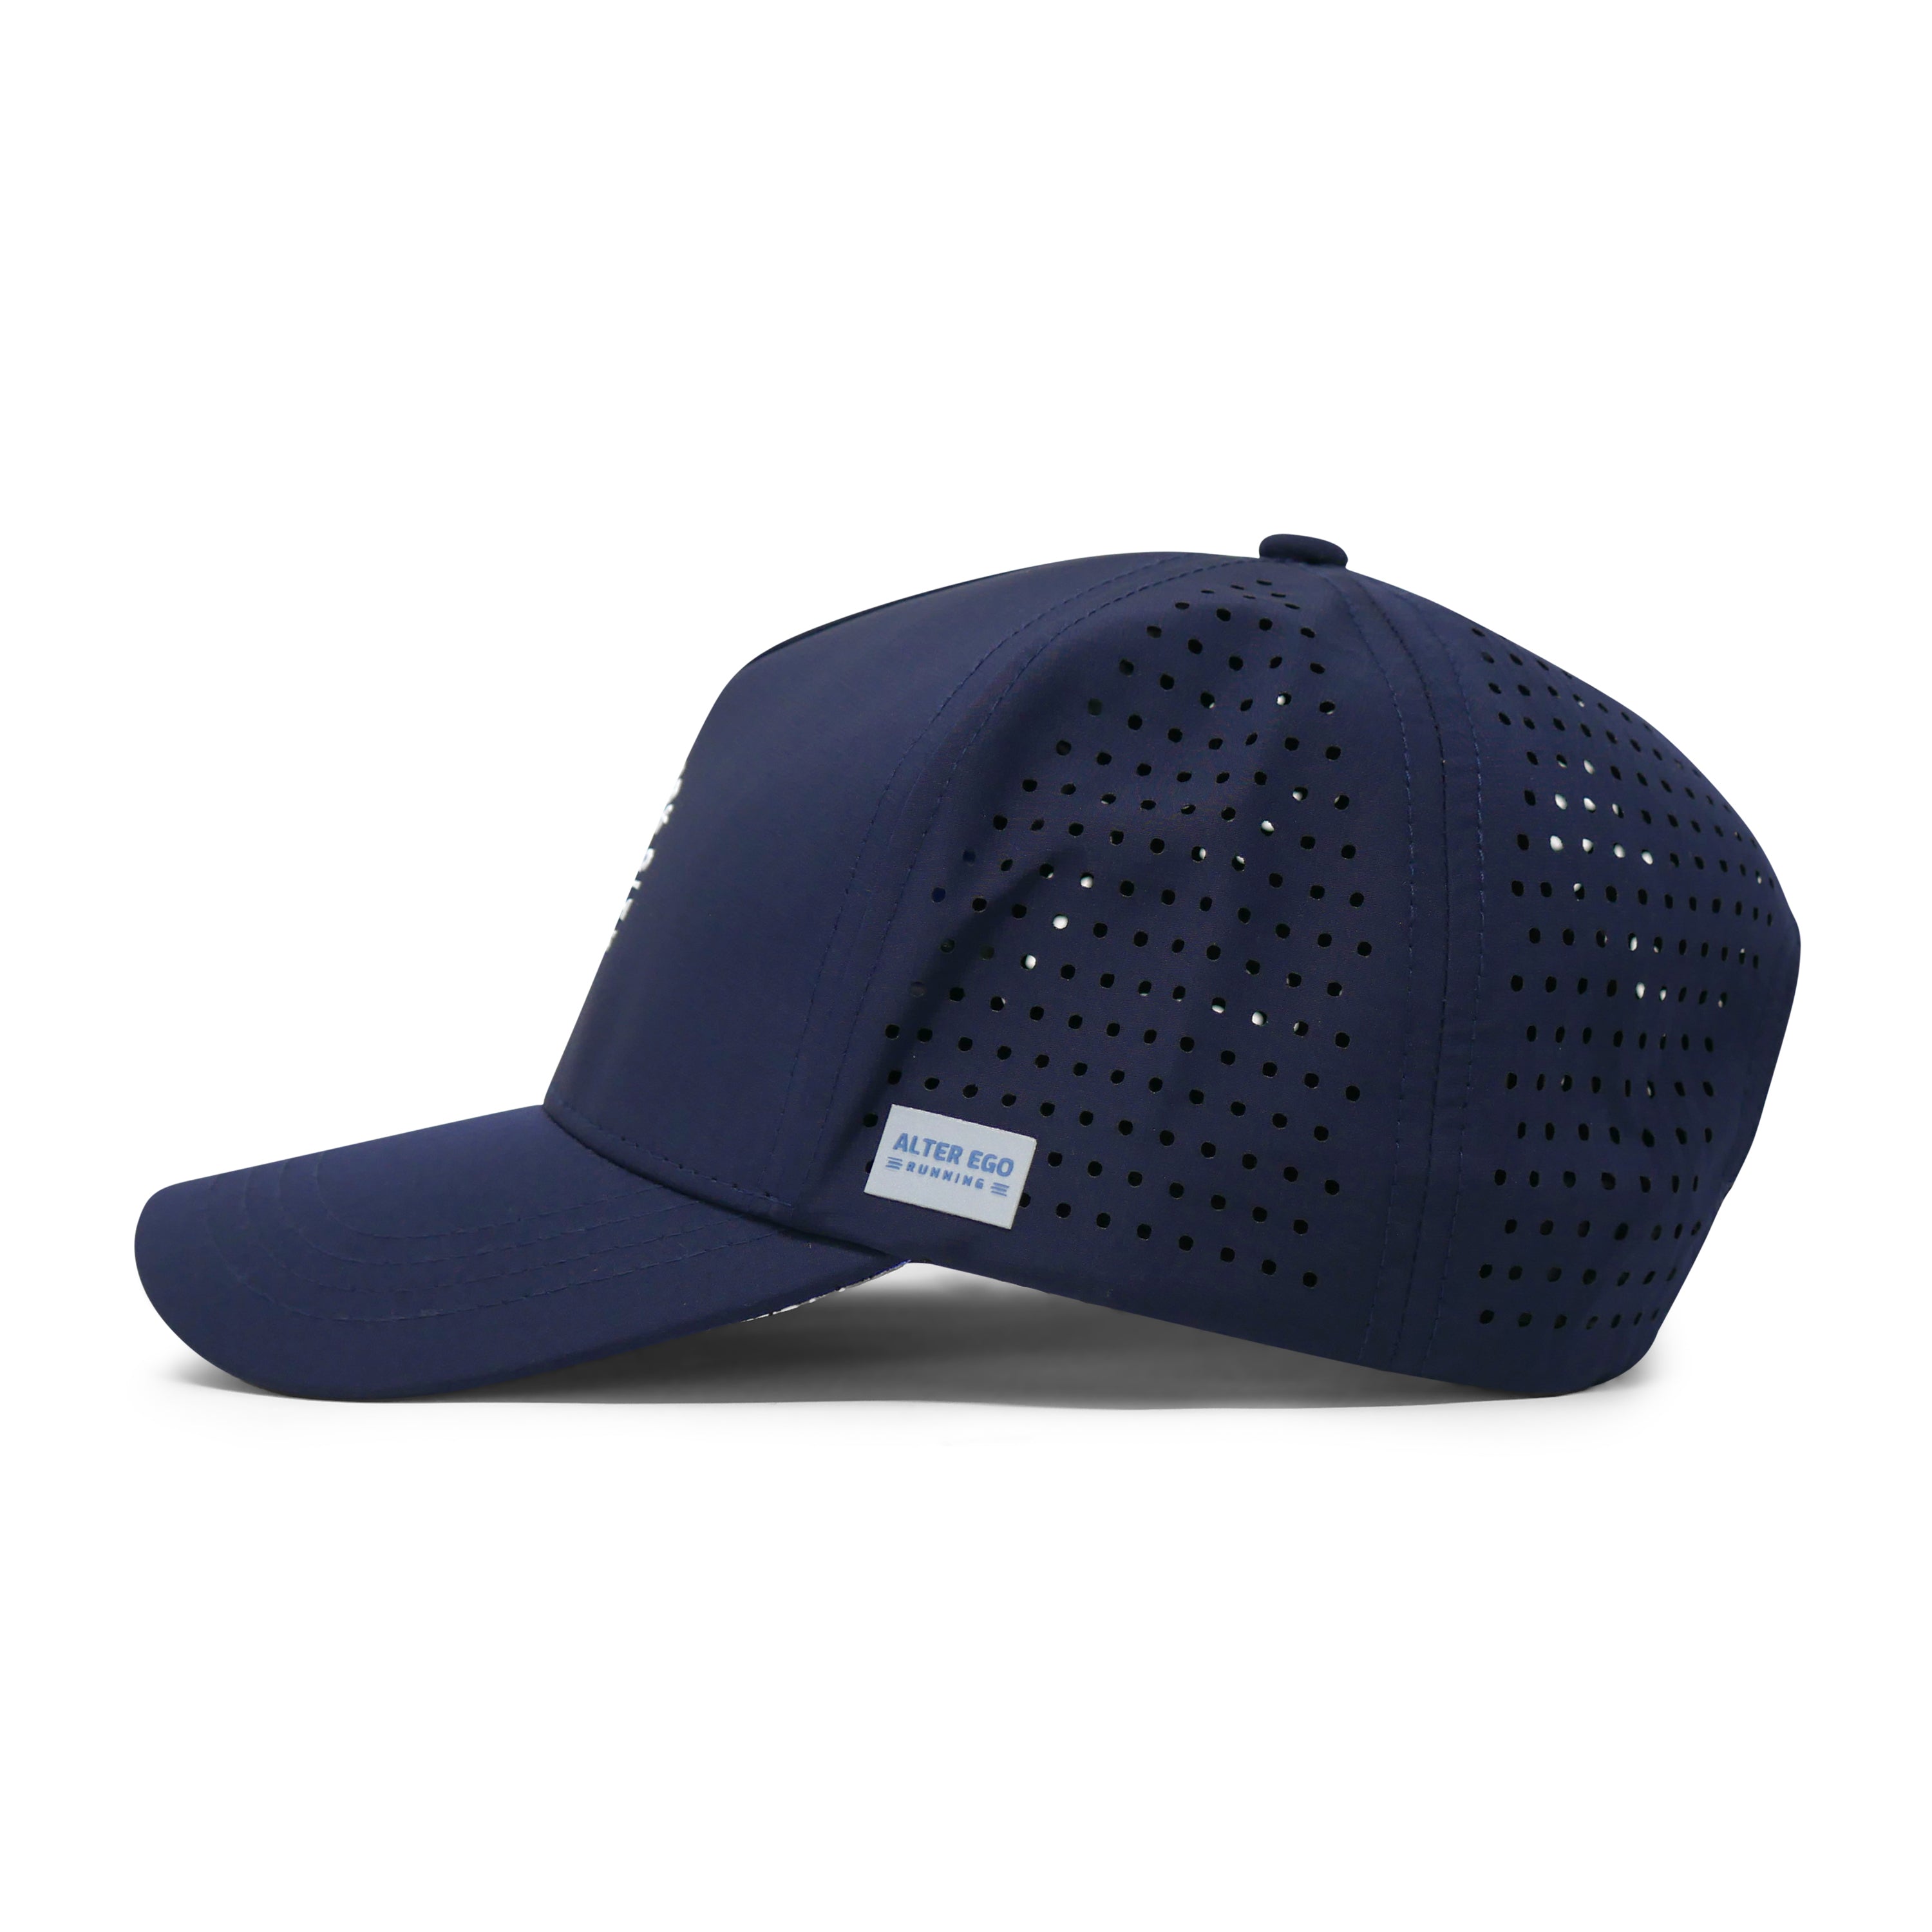 ALL HATS – Tagged men's– Page 4 – Alter Ego Running